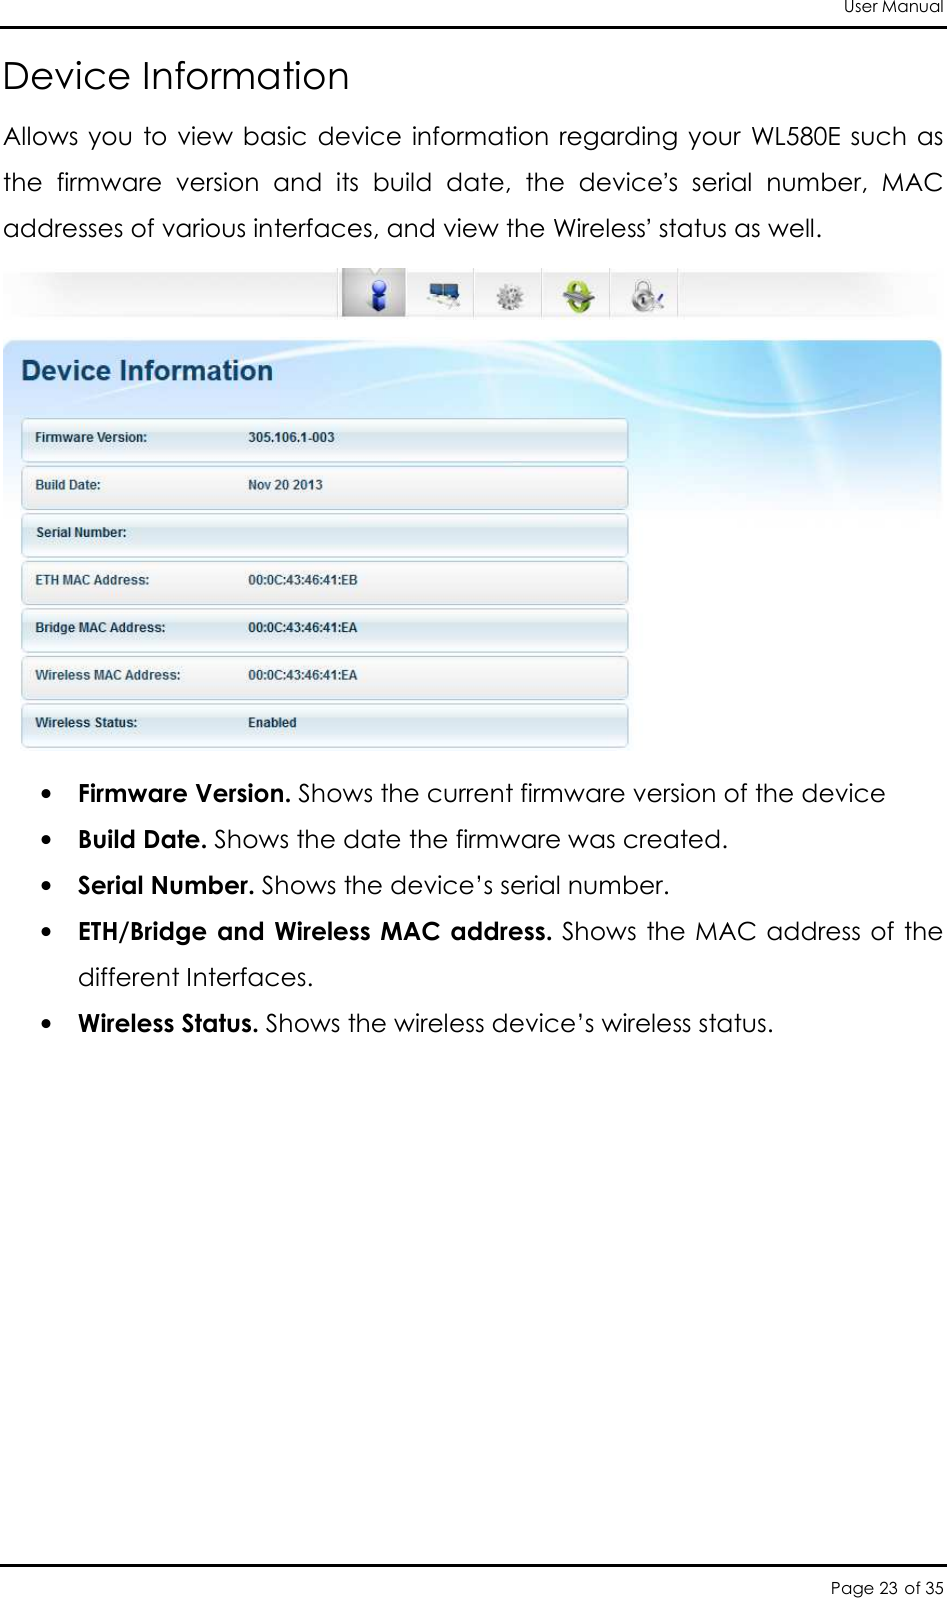 User Manual Page 23 of 35 Device Information Allows  you  to  view  basic  device  information regarding your  WL580E such  as the  firmware  version  and  its  build  date,  the  device’s  serial  number,  MAC addresses of various interfaces, and view the Wireless’ status as well.   • Firmware Version. Shows the current firmware version of the device  • Build Date. Shows the date the firmware was created.  • Serial Number. Shows the device’s serial number.  • ETH/Bridge and  Wireless MAC address. Shows the MAC address of the different Interfaces.  • Wireless Status. Shows the wireless device’s wireless status. 